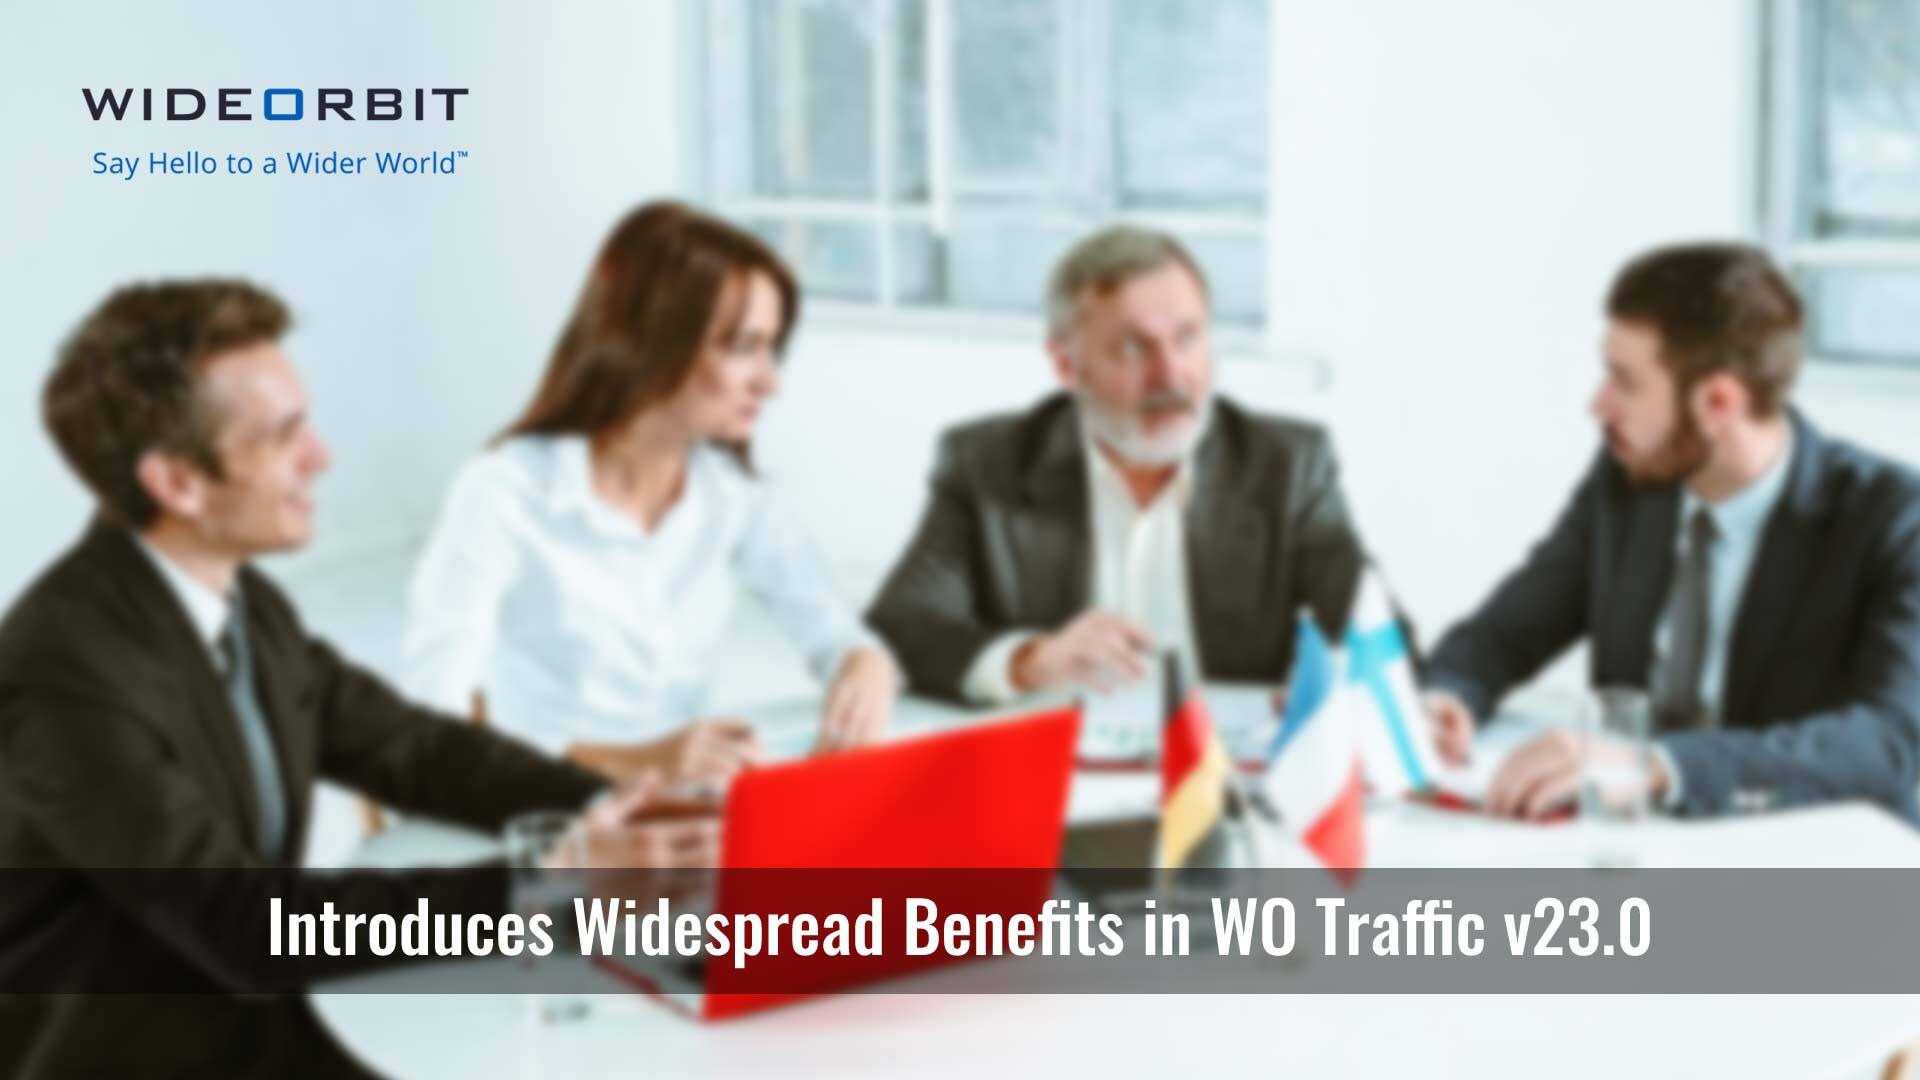 WideOrbit Introduces Widespread Benefits in WO Traffic v23.0